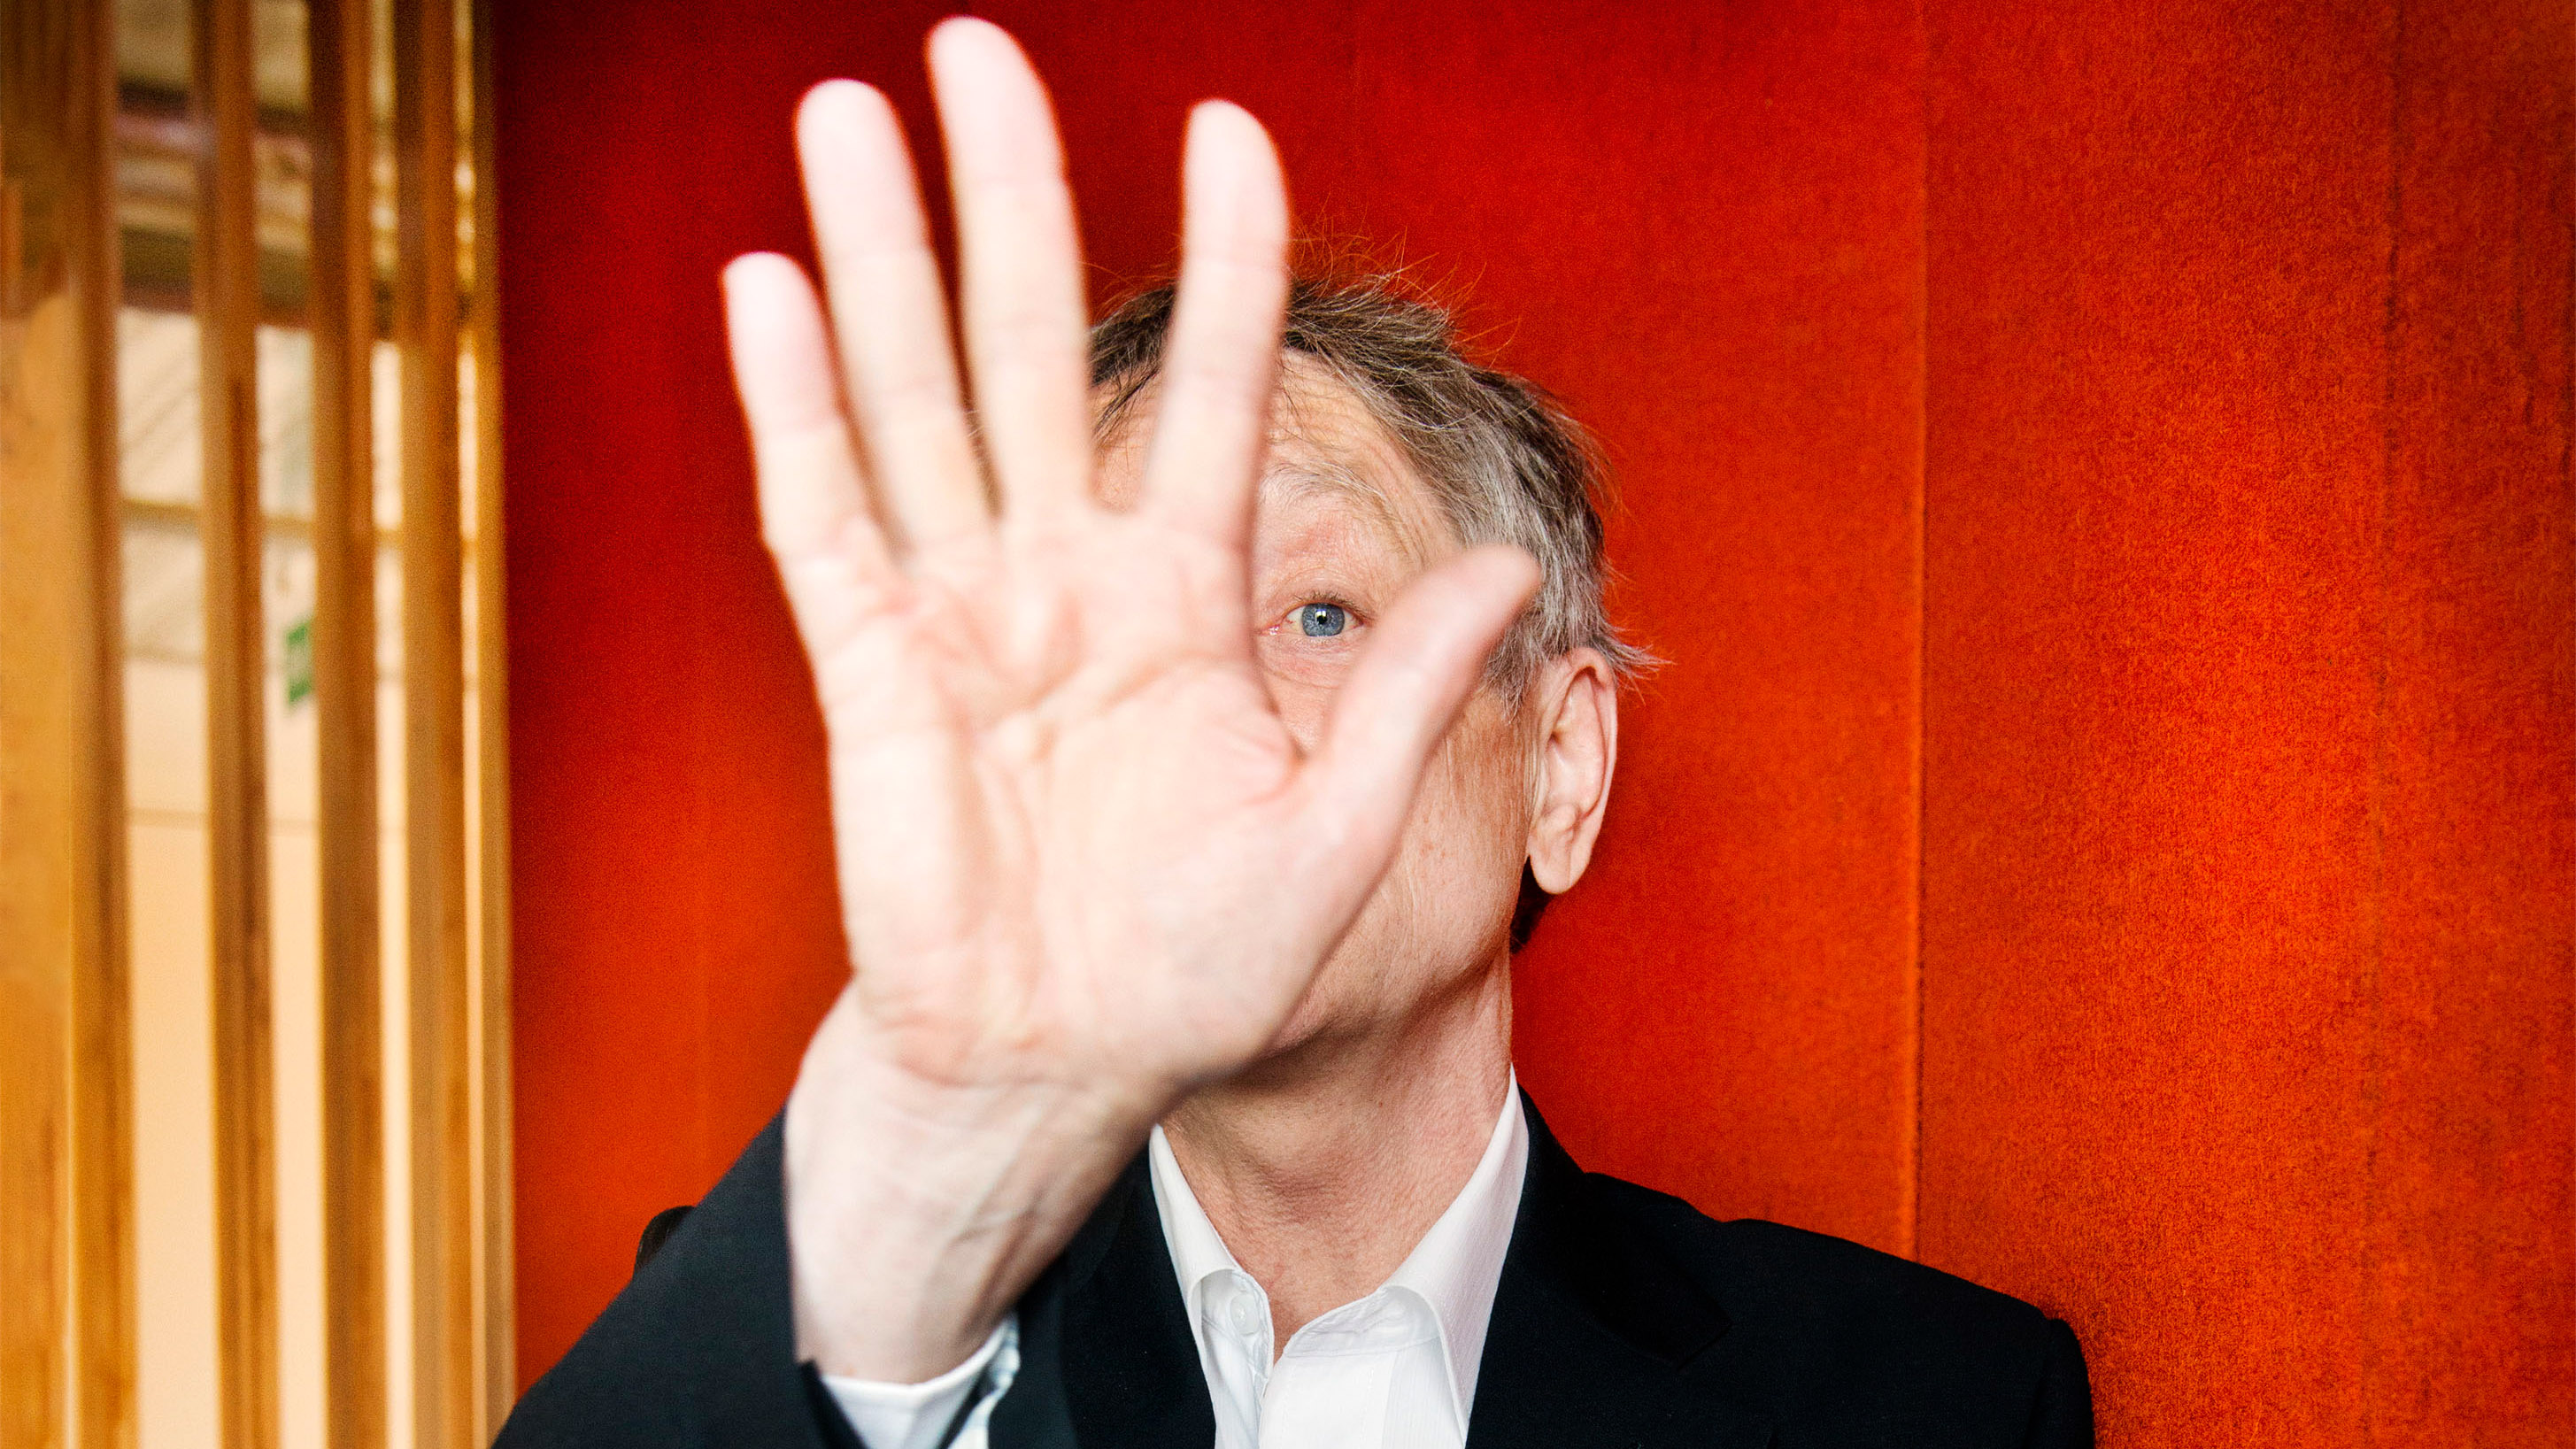 Geoffrey Hinton holds his hand up to partially obscure his face